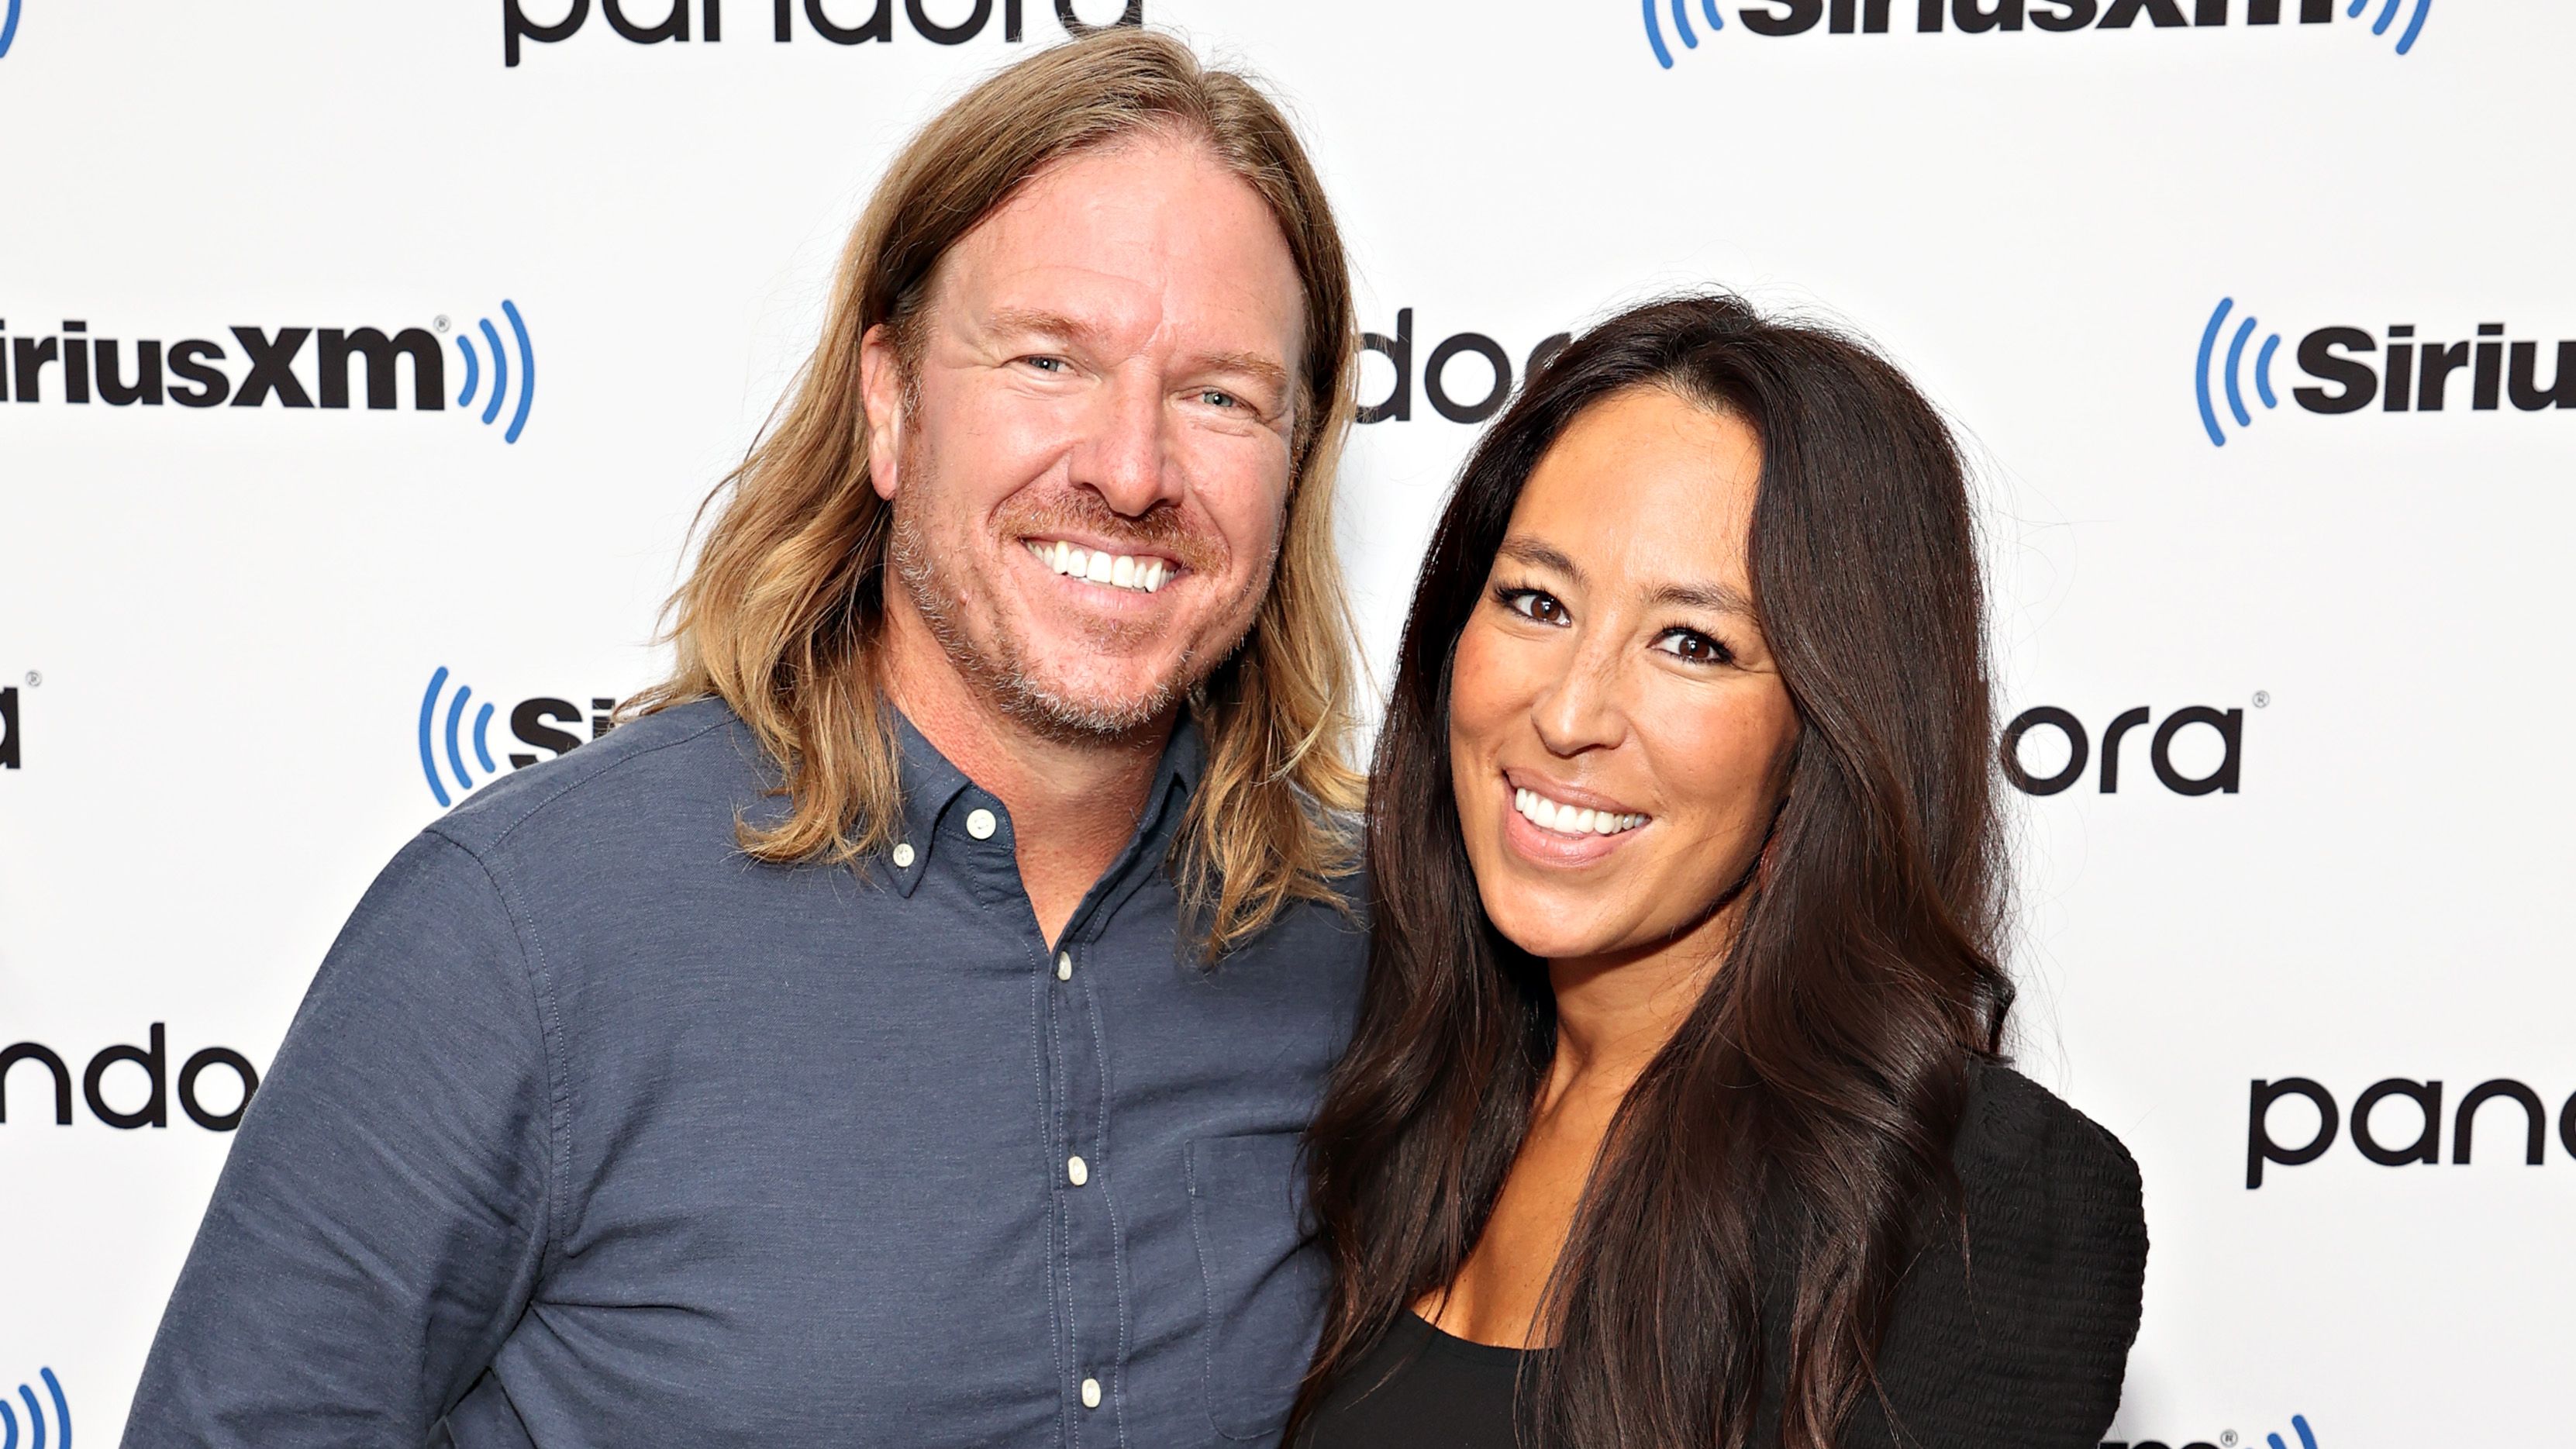 Fixer Upper' Star Joanna Gaines Stuns in New Photo from New York Appearance